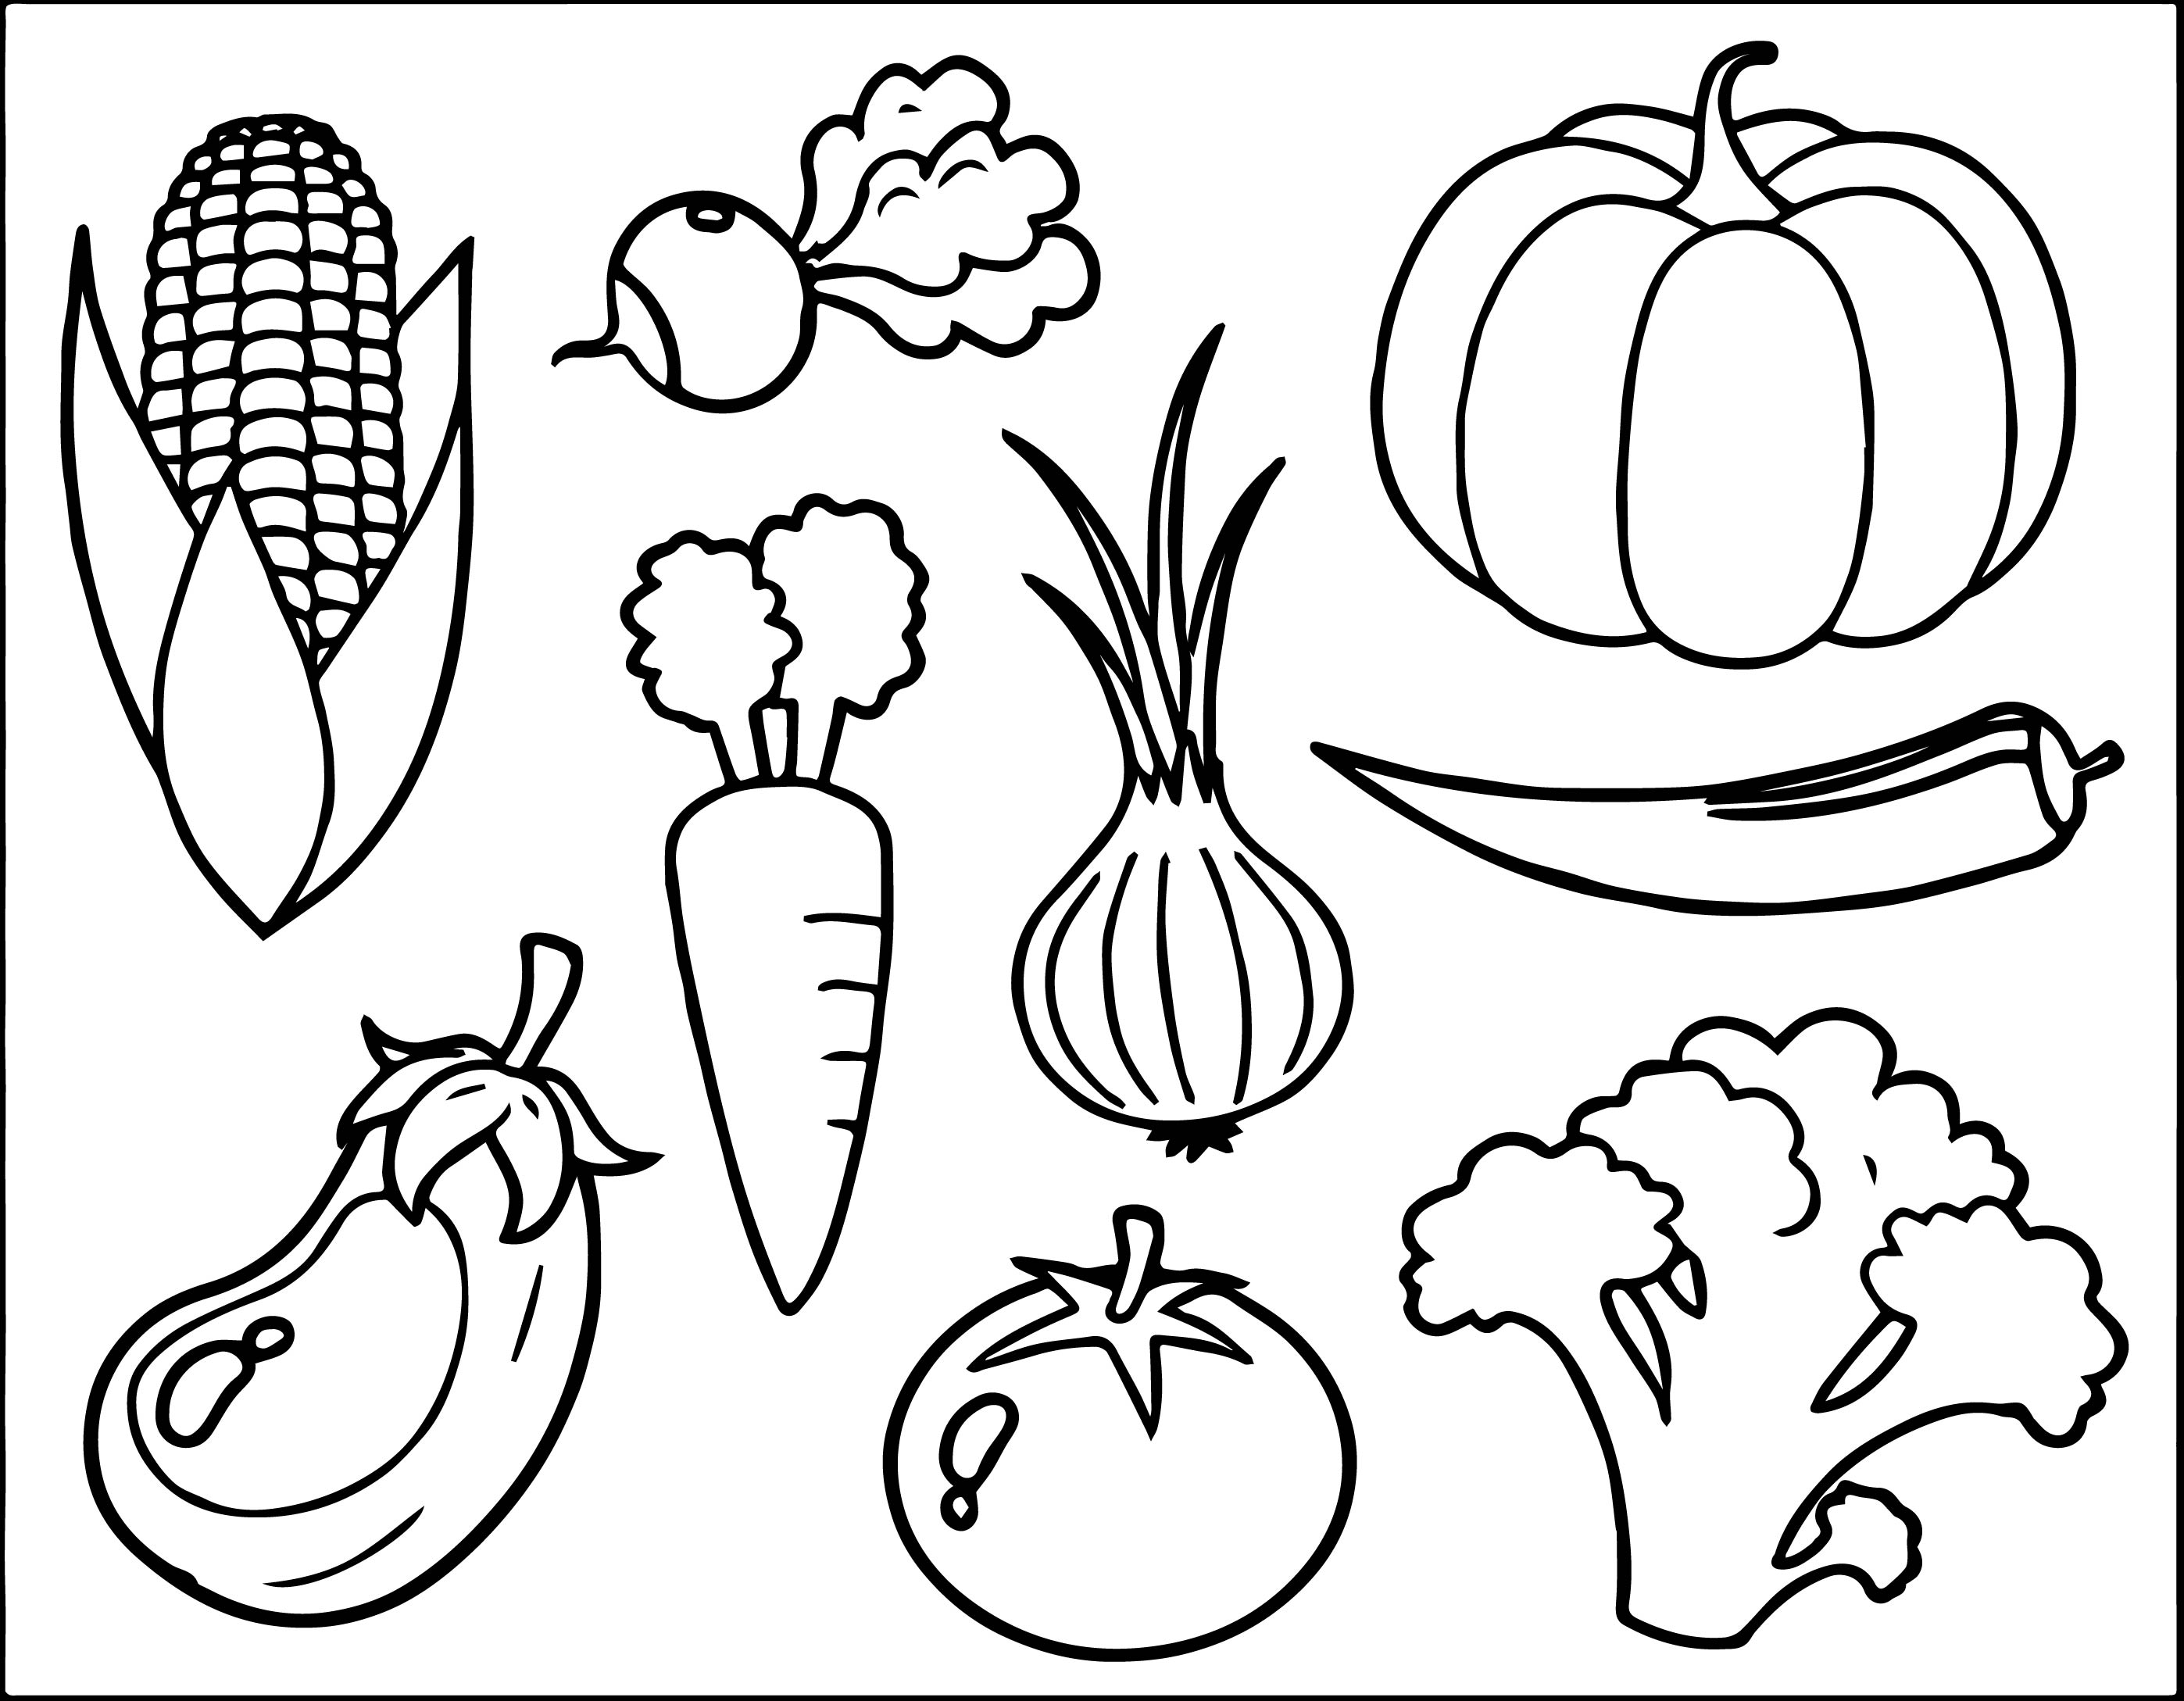 printable-vegetables-coloring-pages-printable-world-holiday